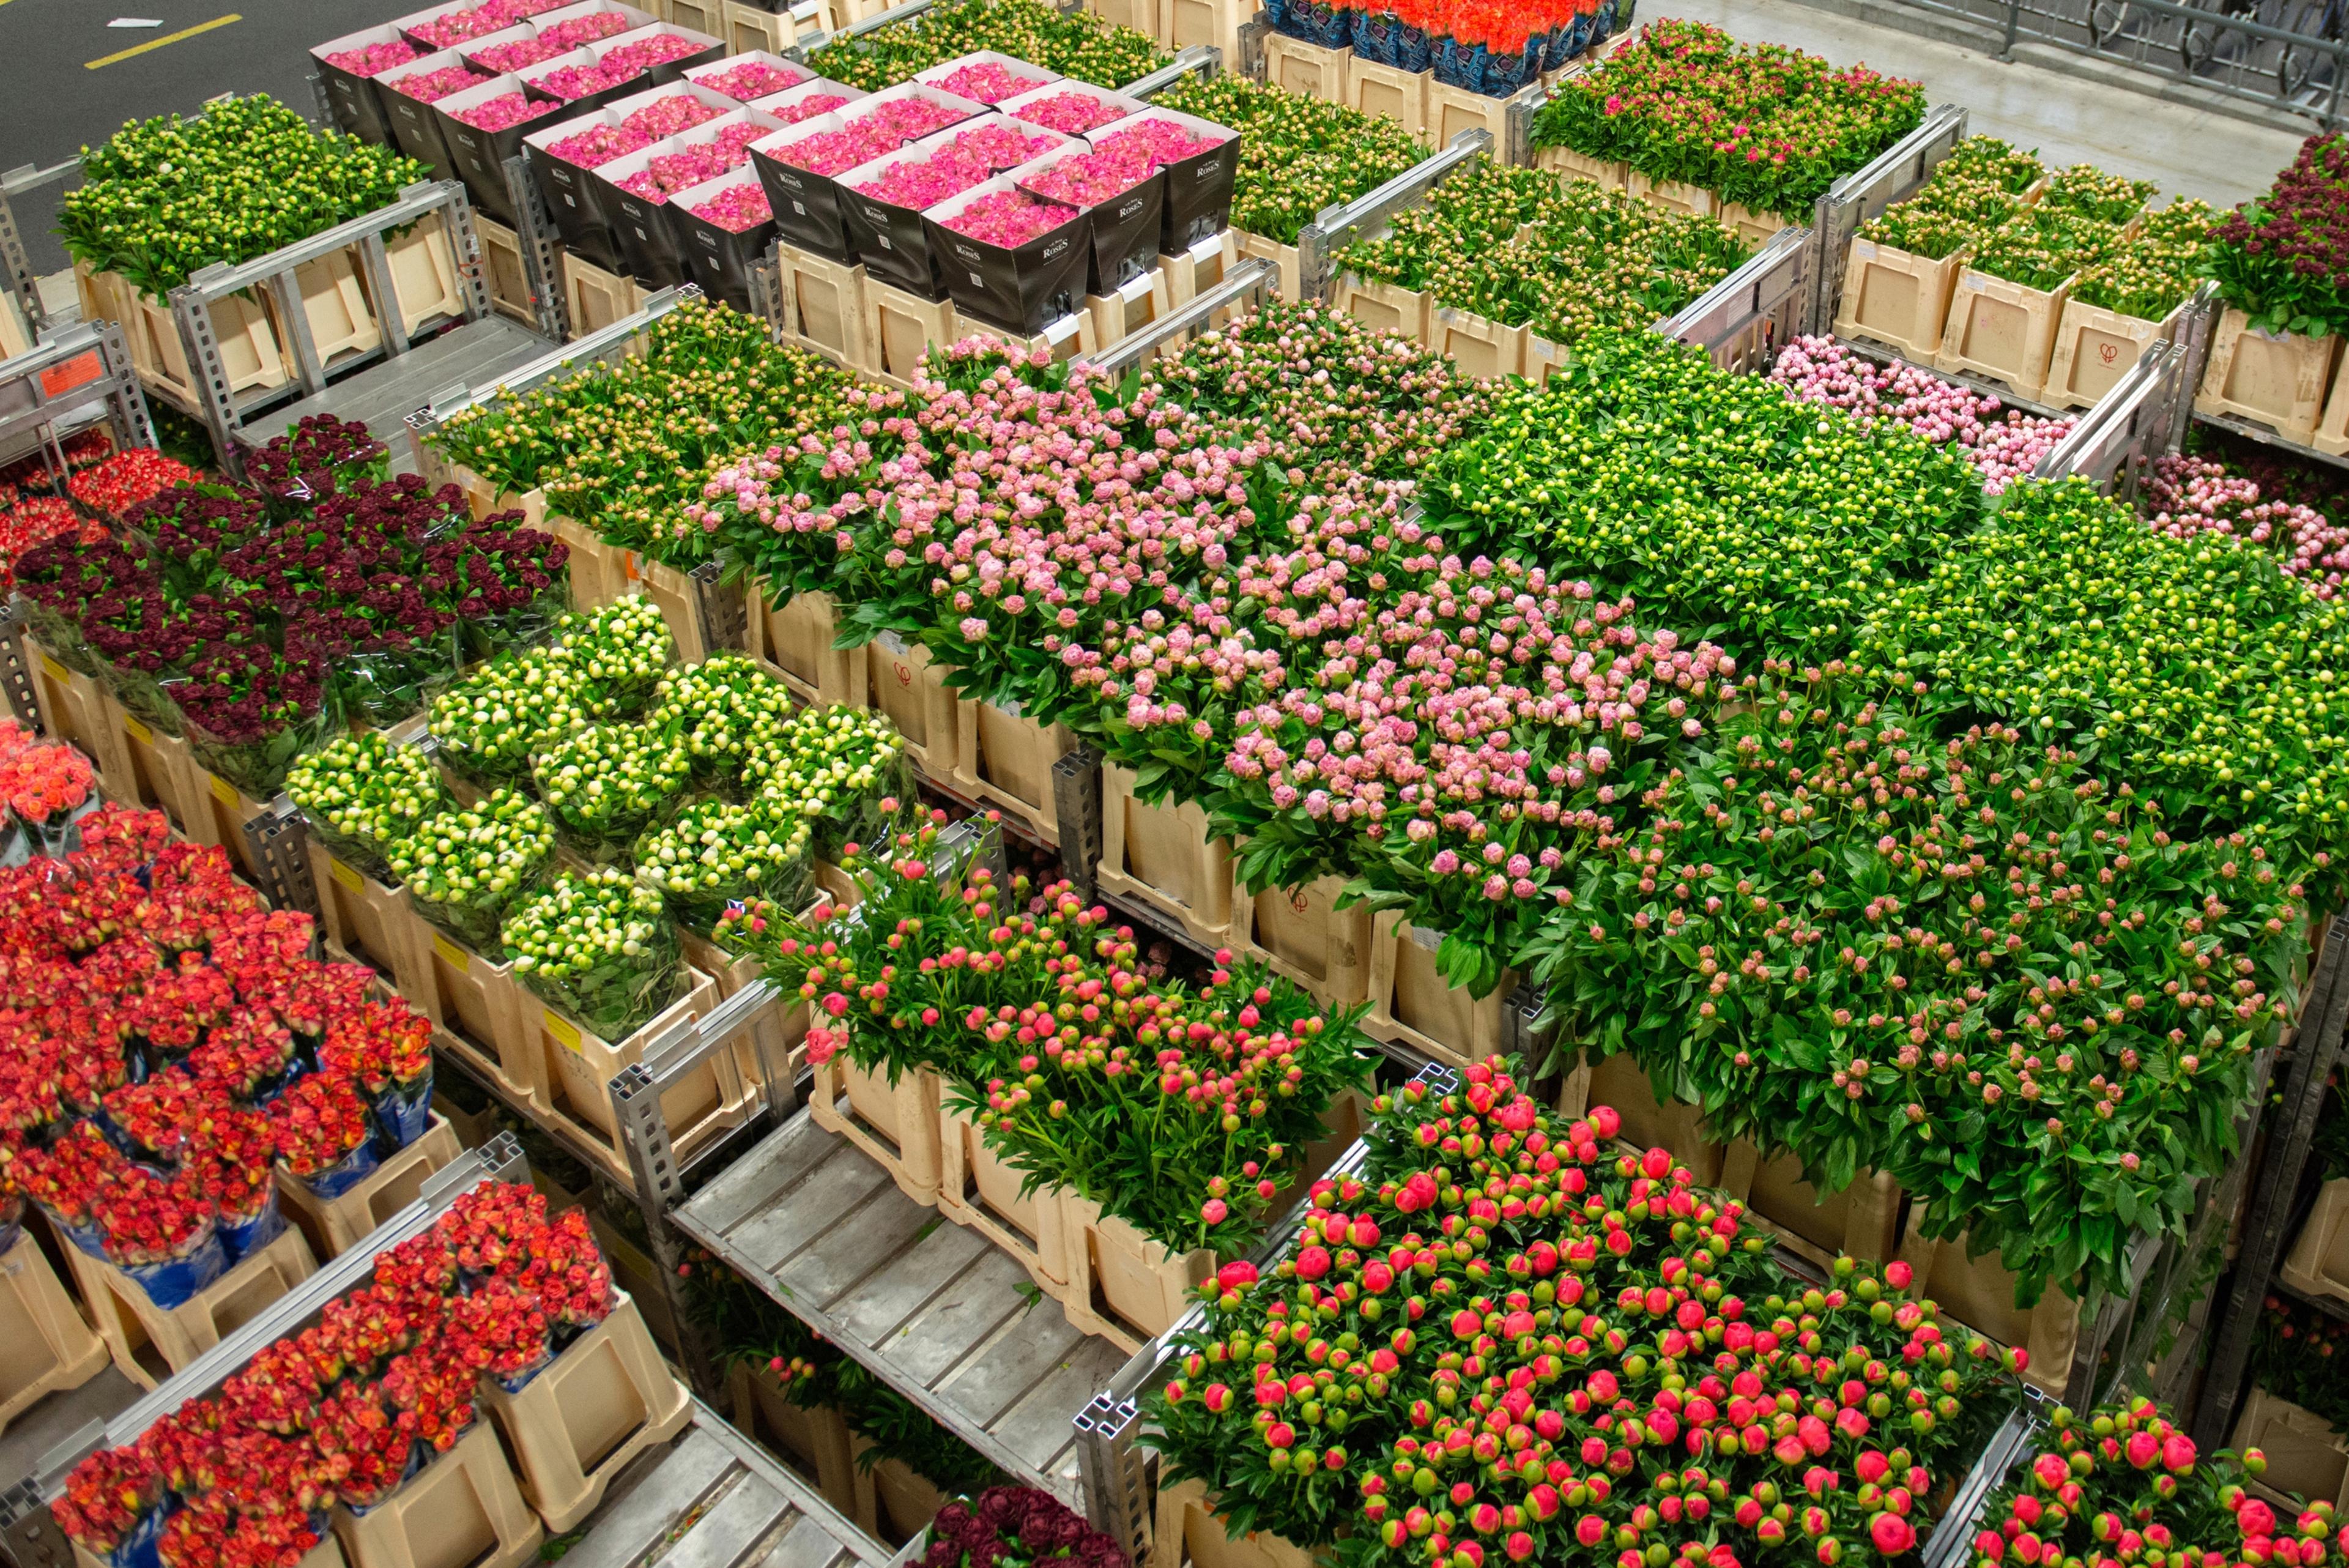 blooms awaiting shipment in a warehouse, symbolizing Kenya’s thriving cut flower industry and its global reach facilitated by aviation